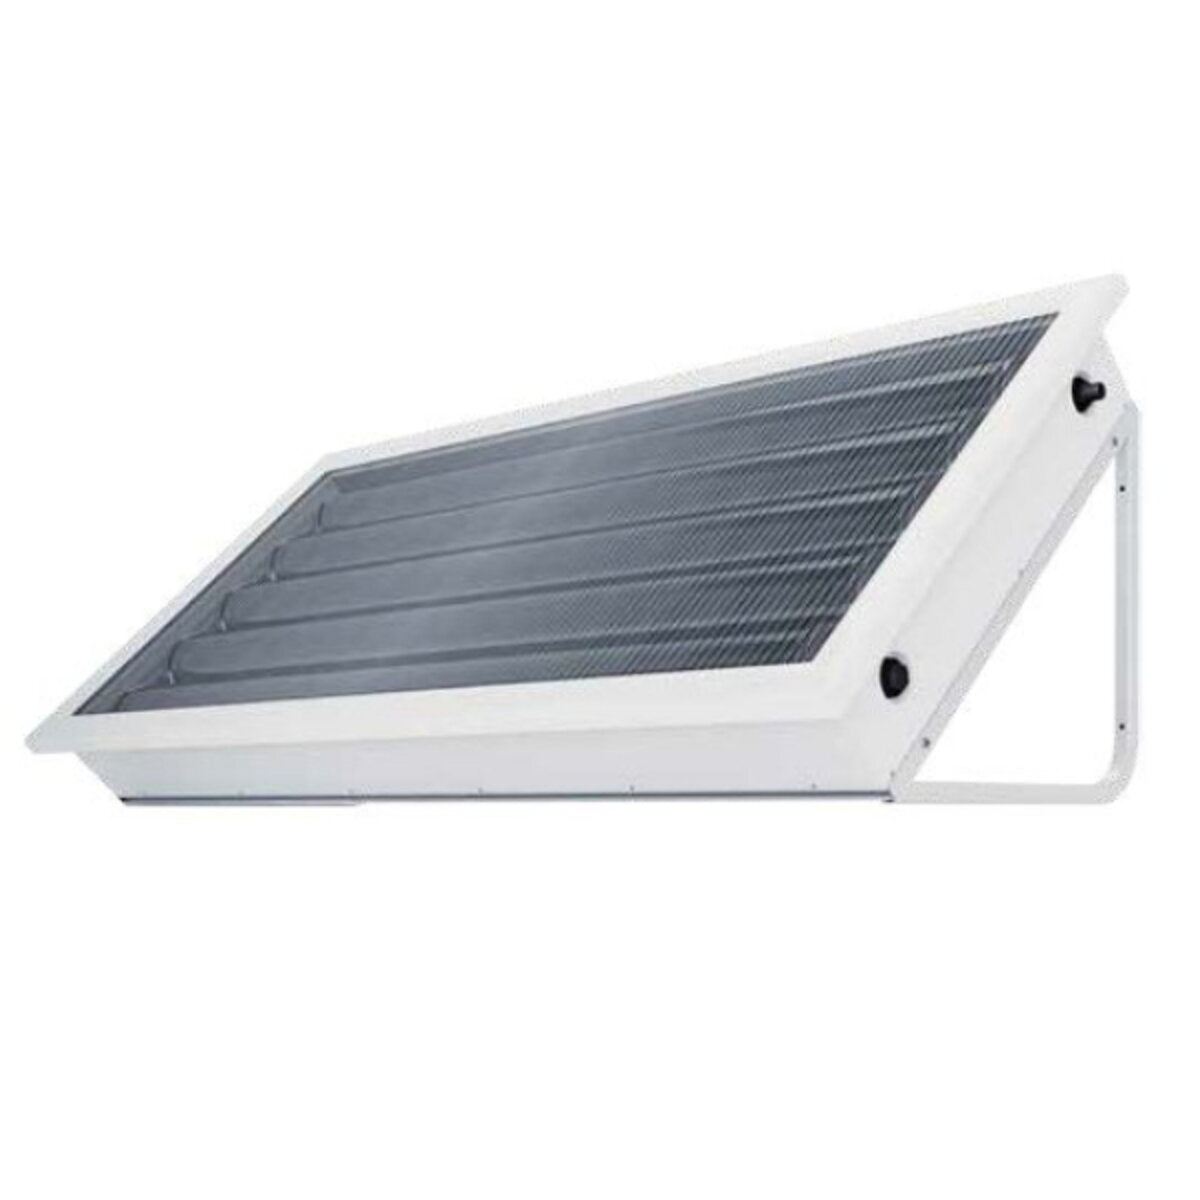 Pleion Ego 220 white natural circulation solar panel 210 liters flat and sloping roof